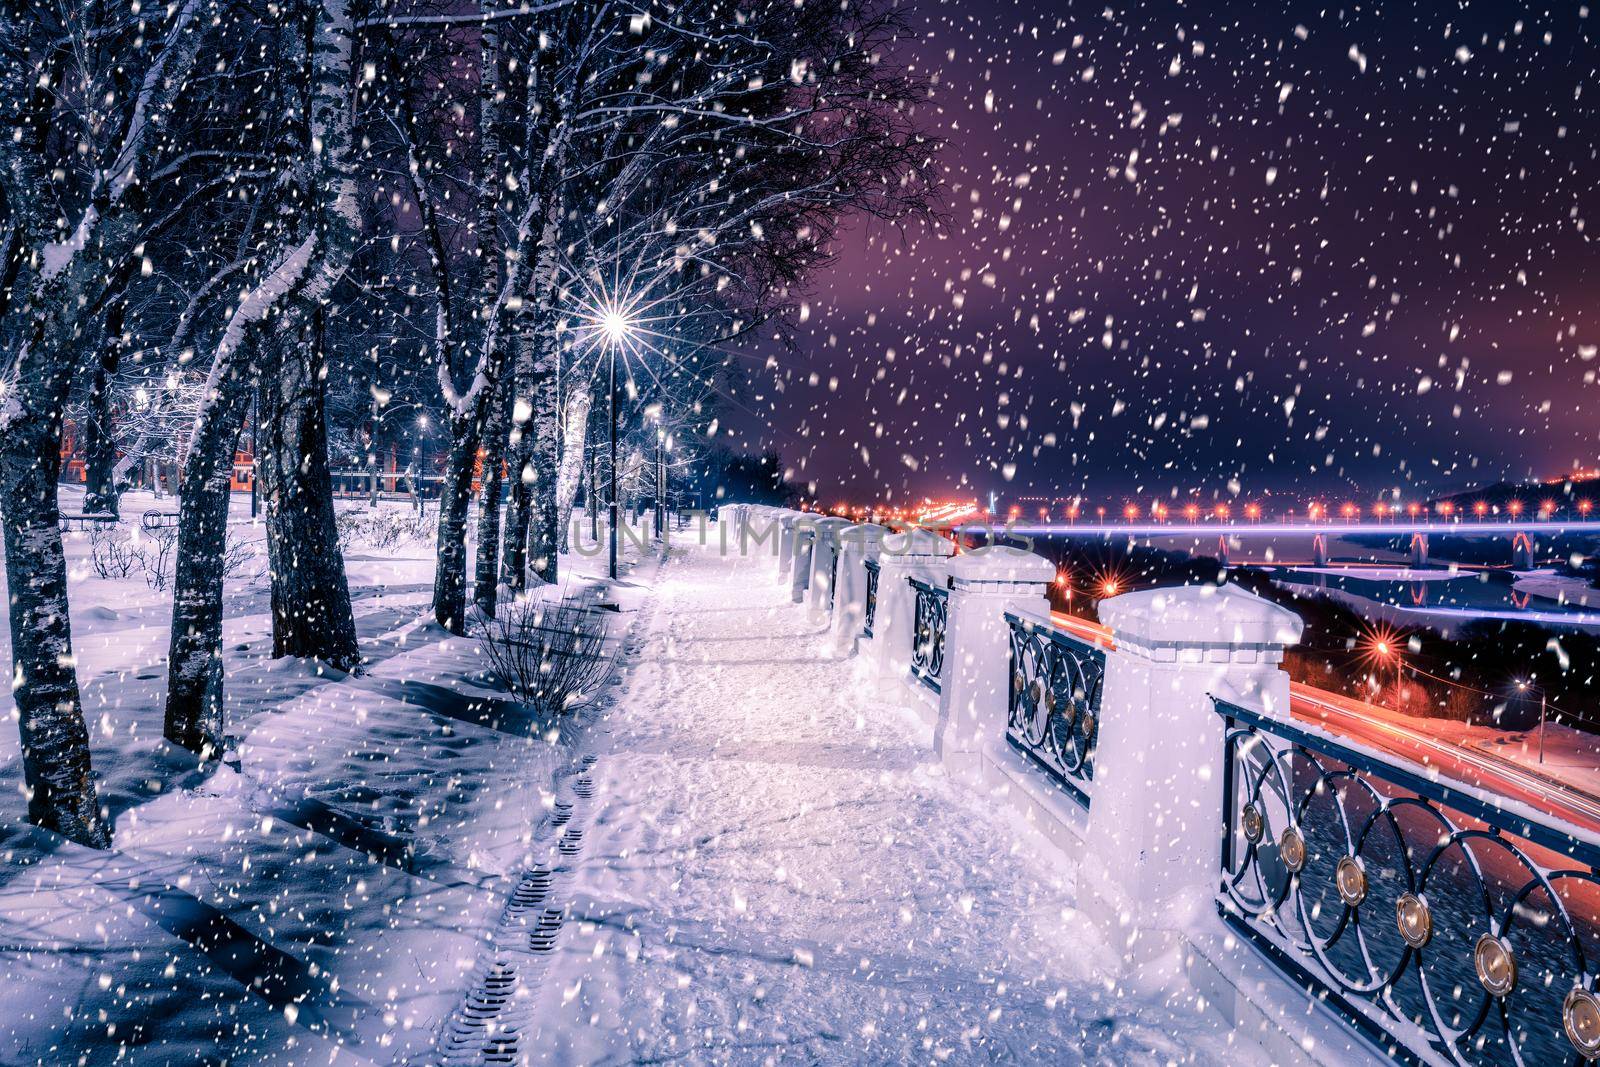 Snowfall in a winter park at night with lanterns, view to road with car motion, pavement and trees covered with snow.